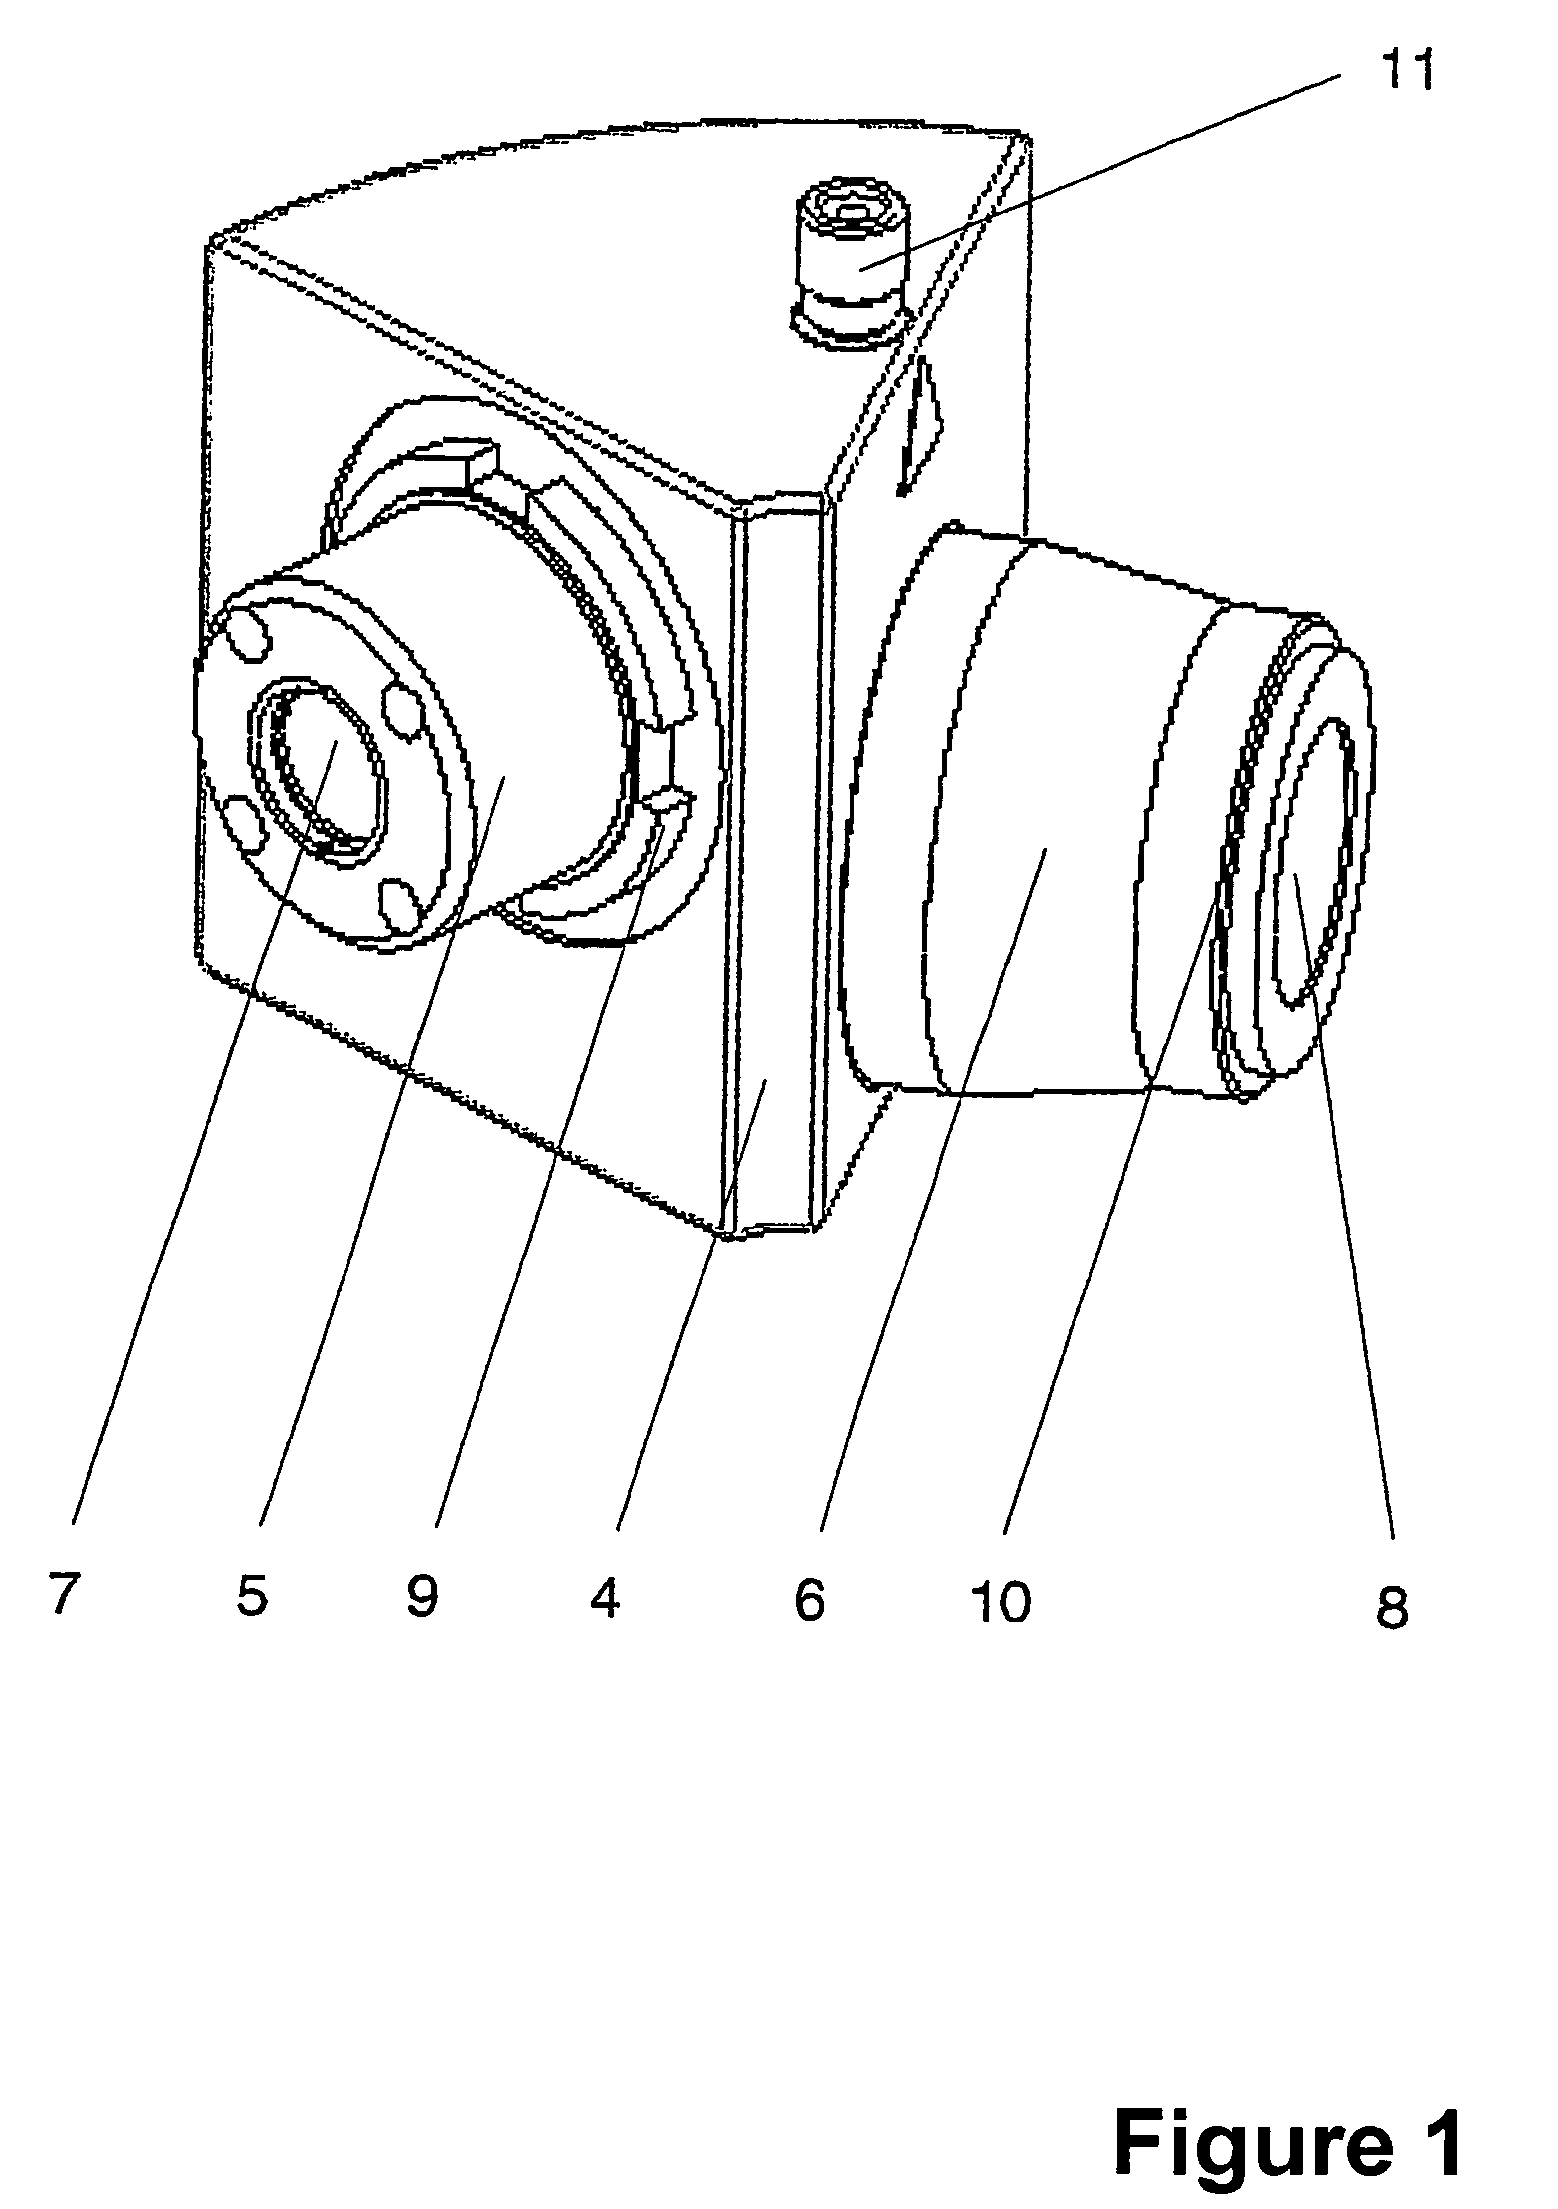 Camera adapter for optical devices, in particular microscopes